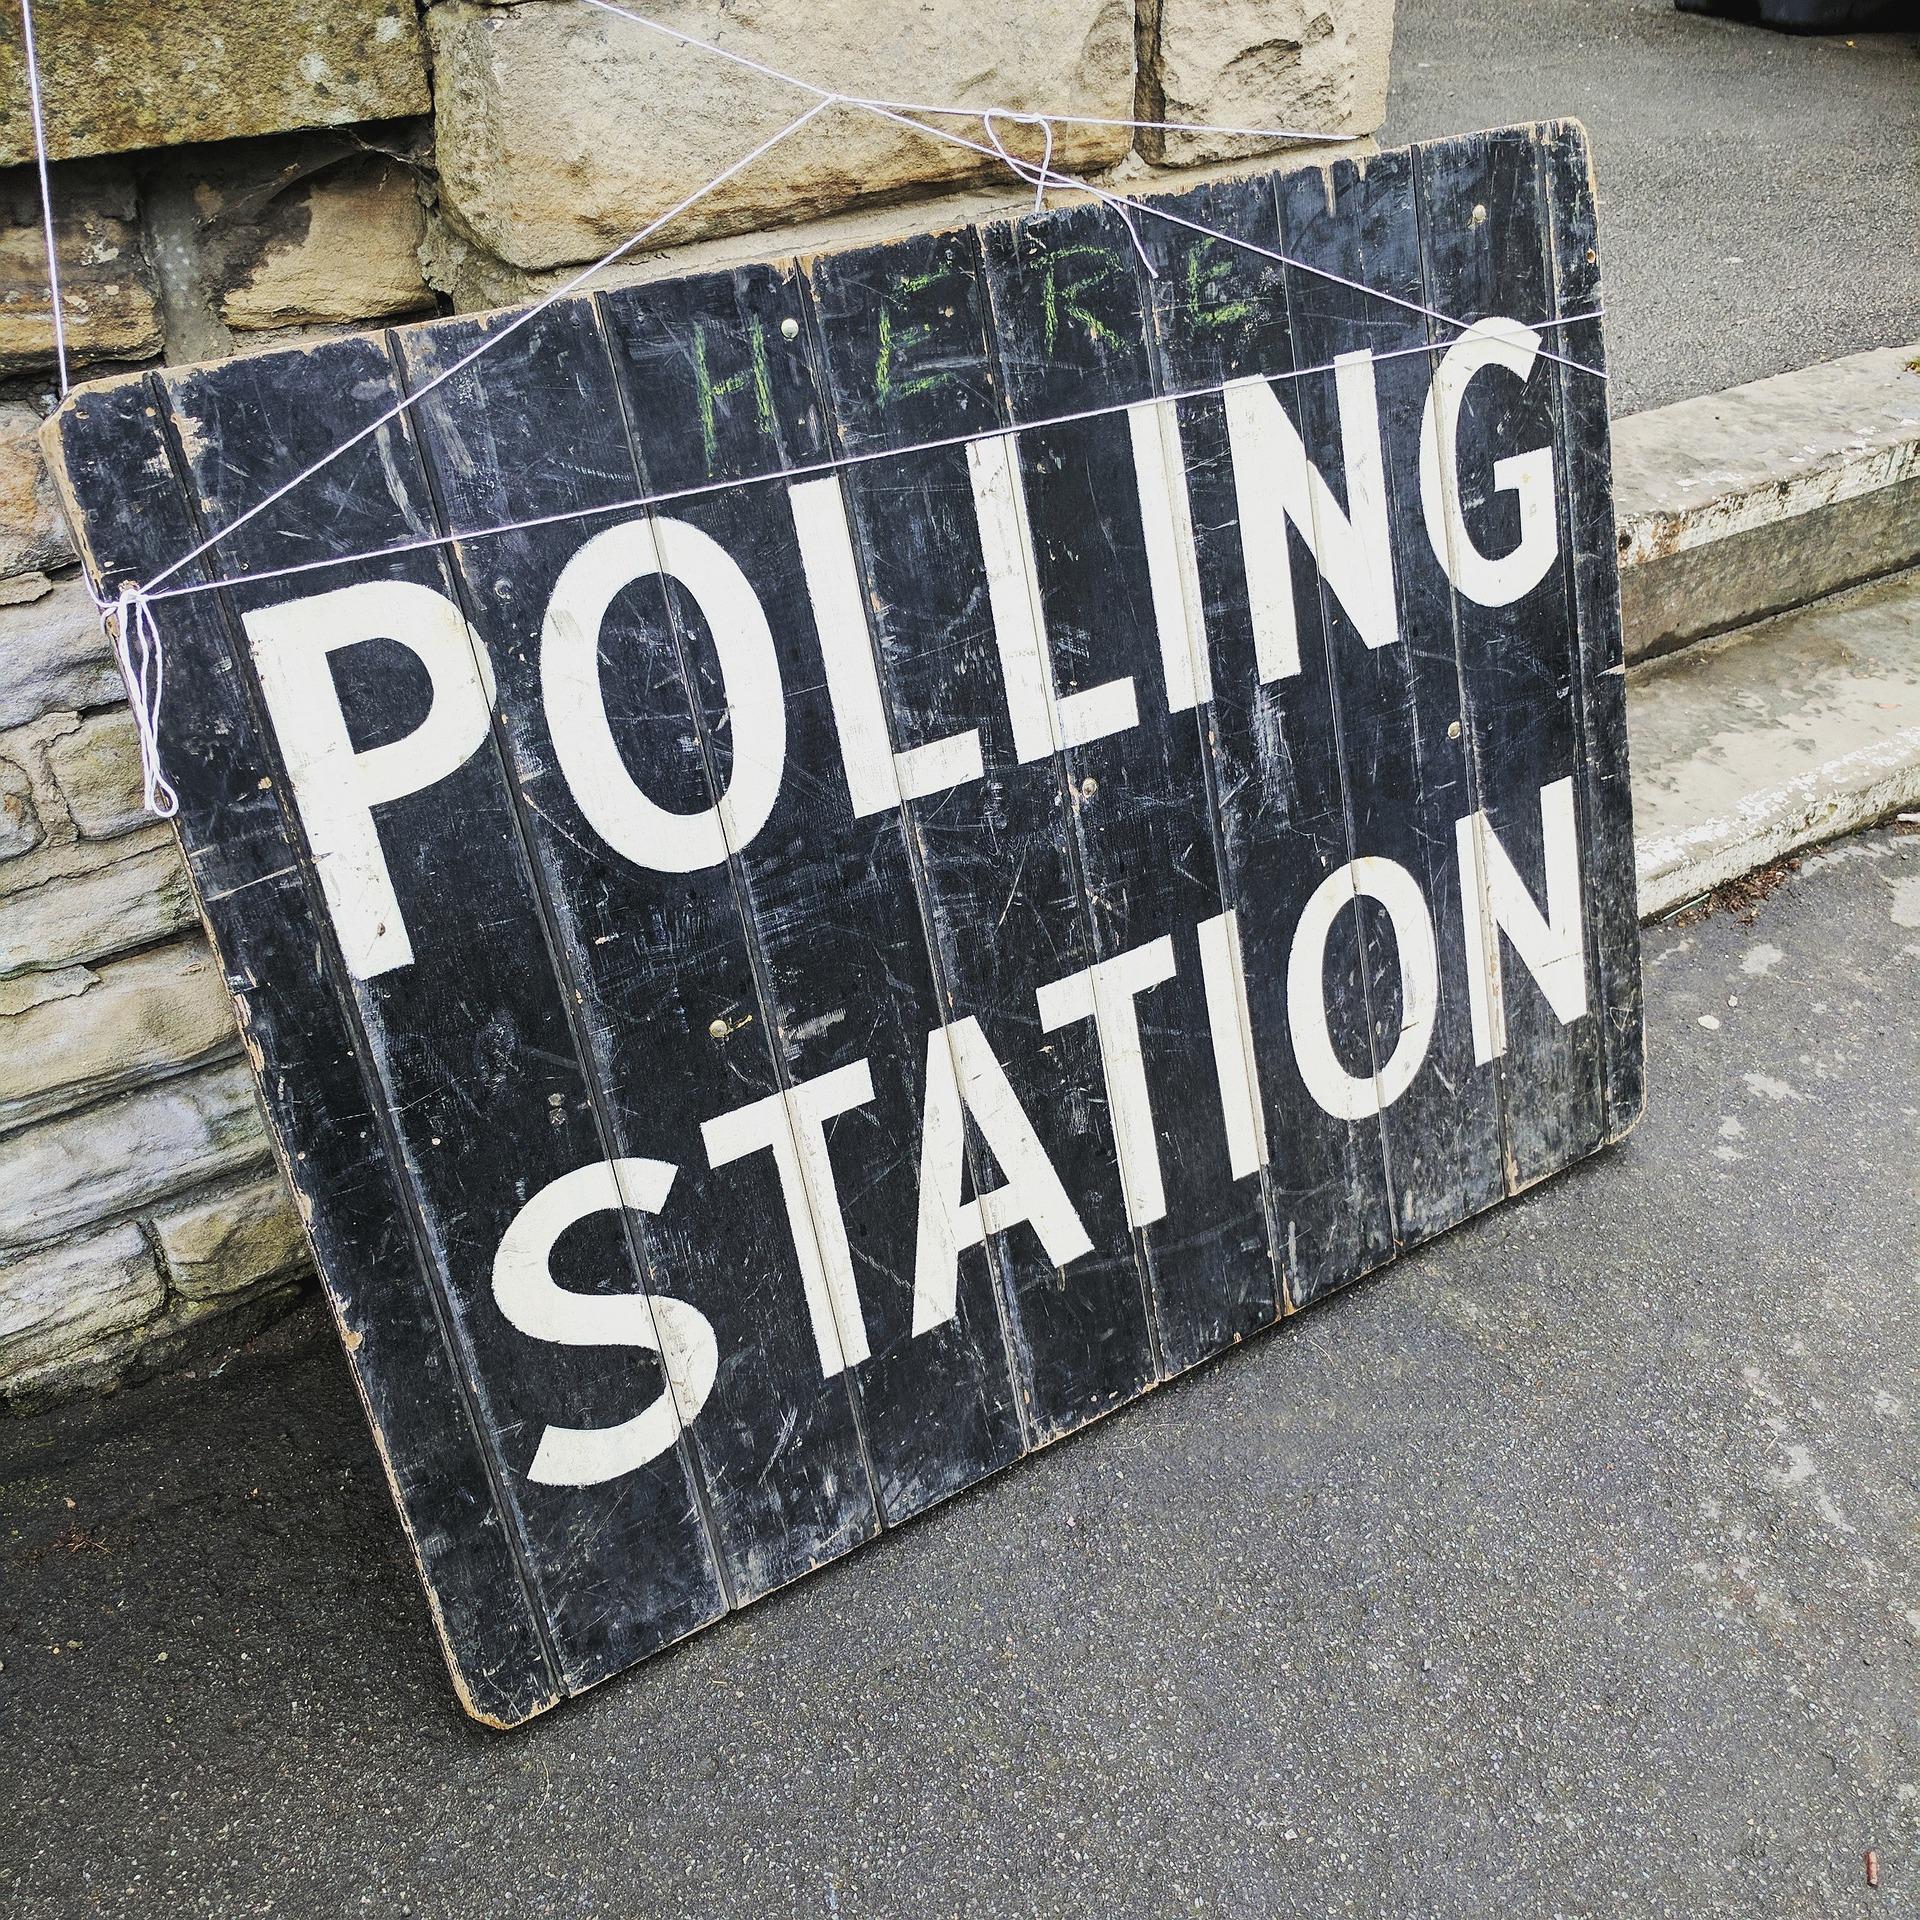 A black sign leans against a brown stone wall. The sign reads "Polling Station" in white all caps lettering.